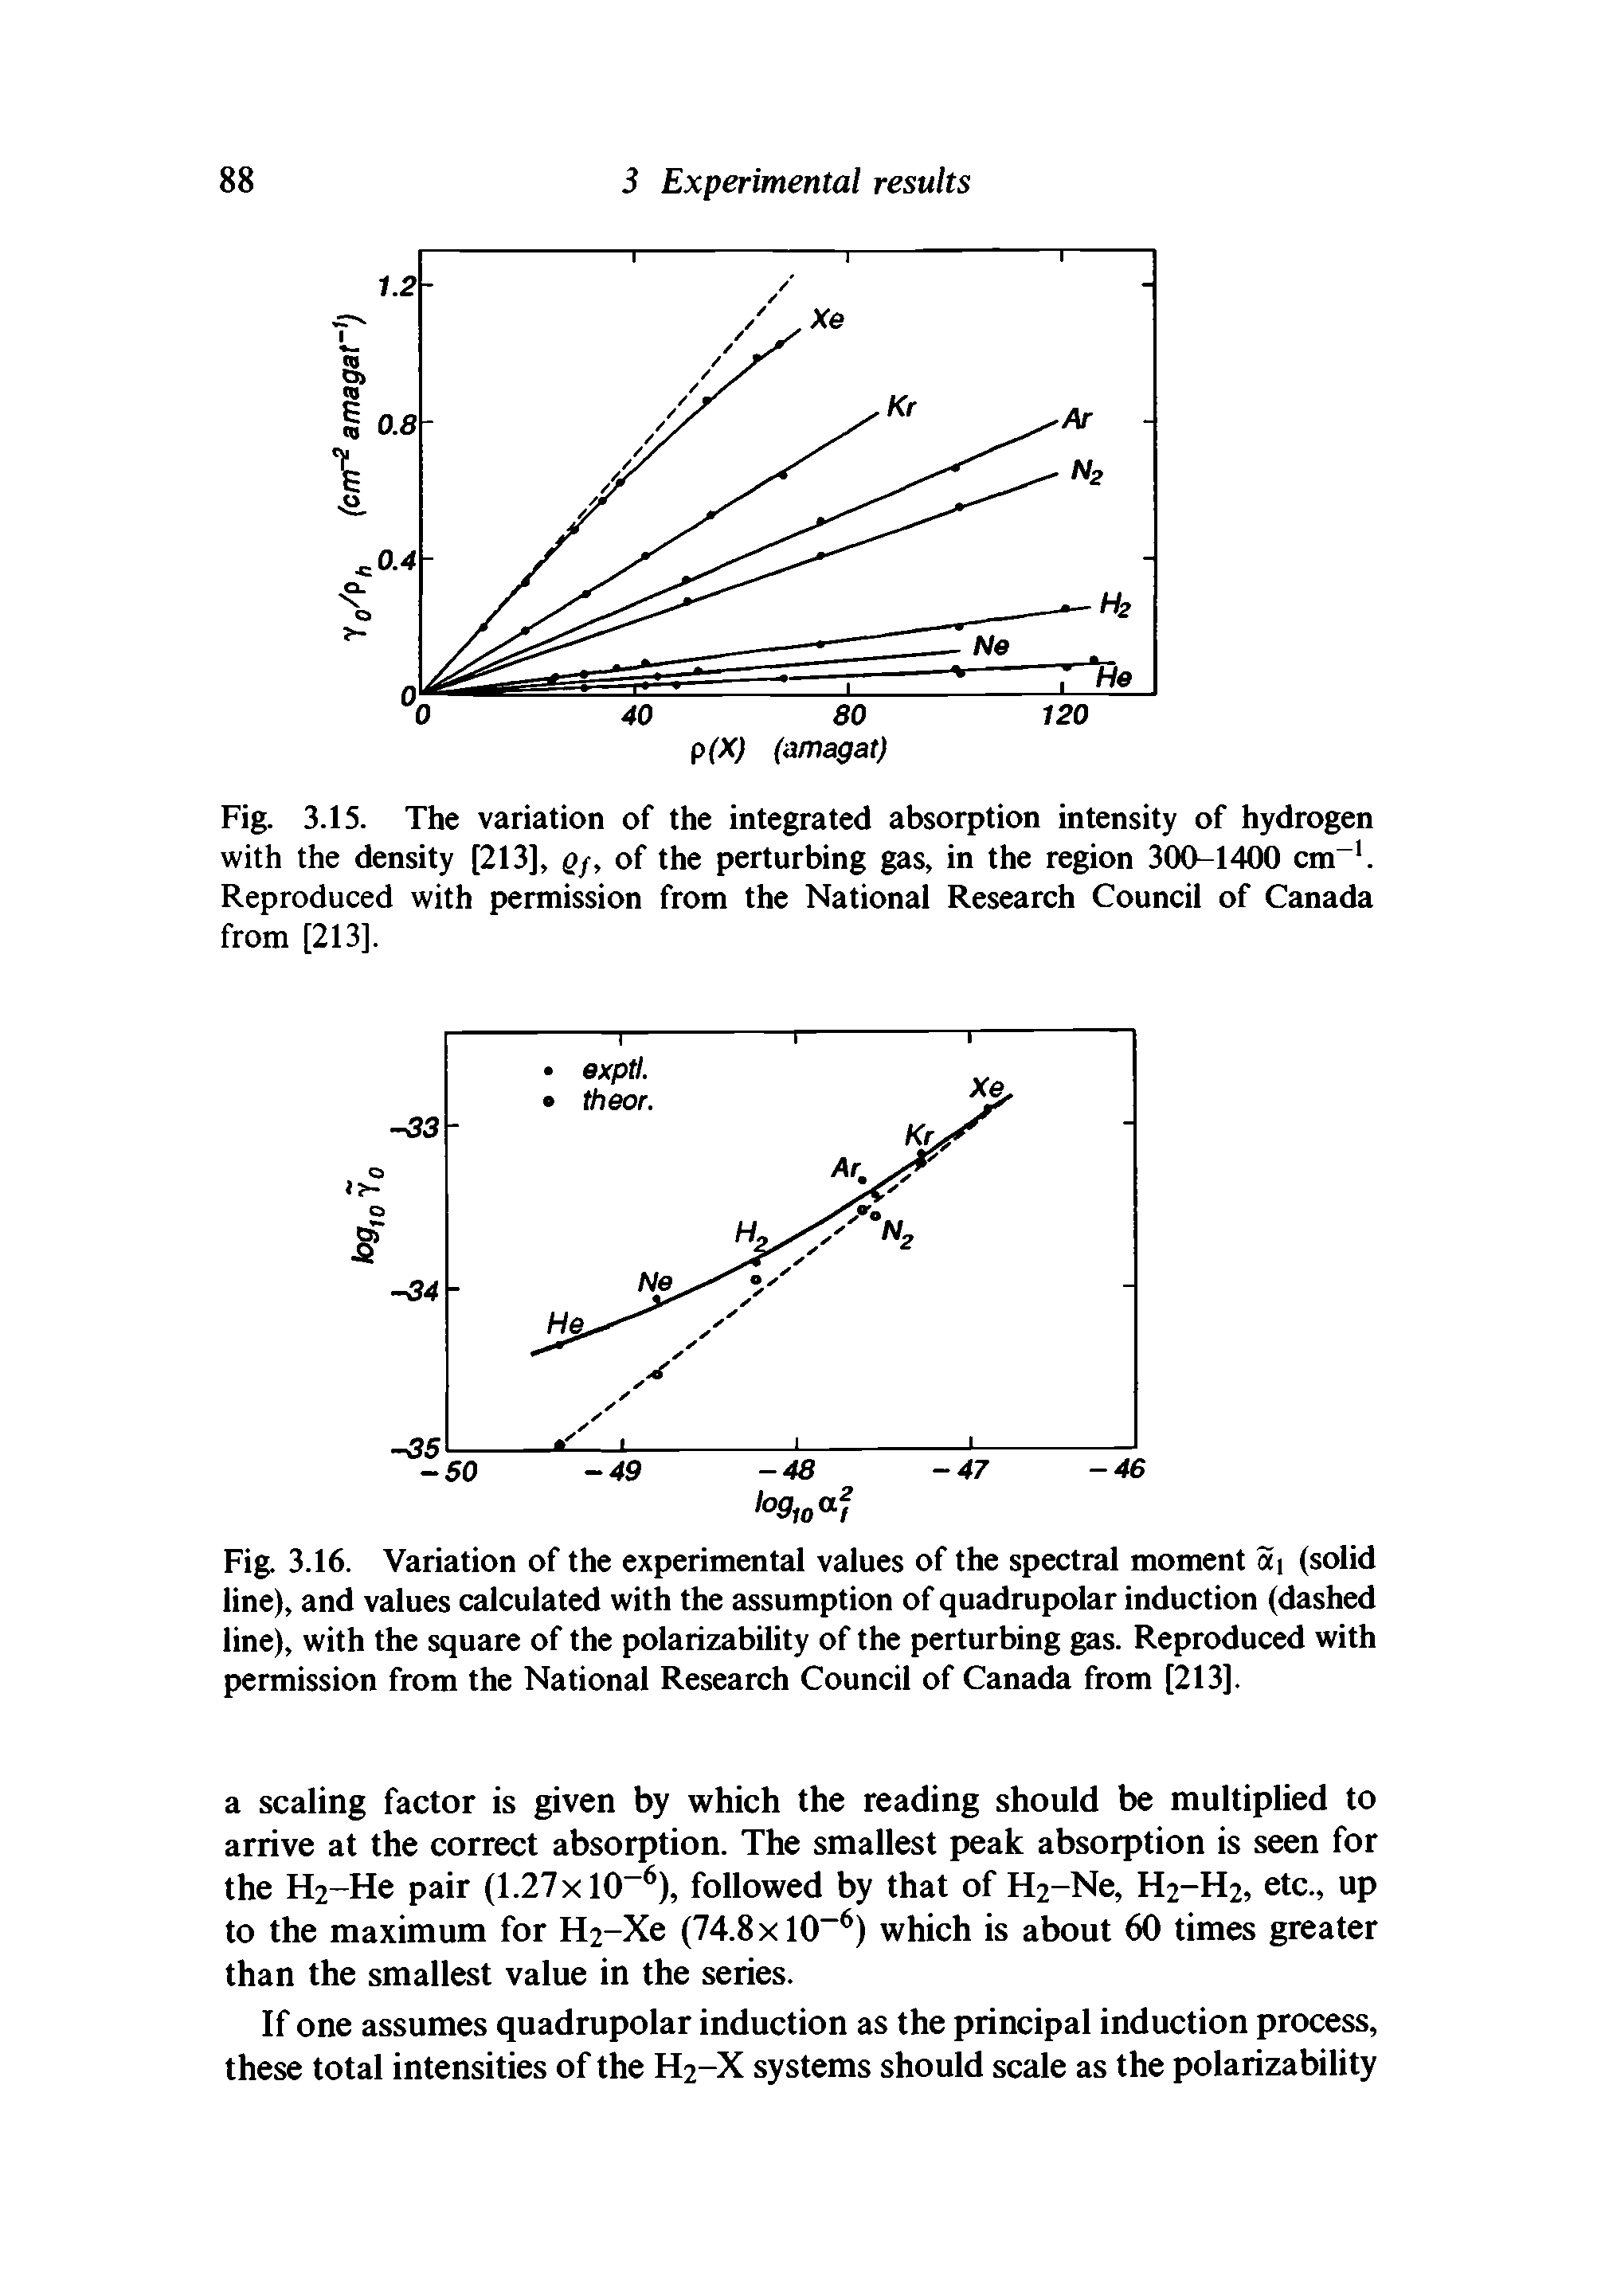 Fig. 3.16. Variation of the experimental values of the spectral moment Sq (solid line), and values calculated with the assumption of quadrupolar induction (dashed line), with the square of the polarizability of the perturbing gas. Reproduced with permission from the National Research Council of Canada from [213].